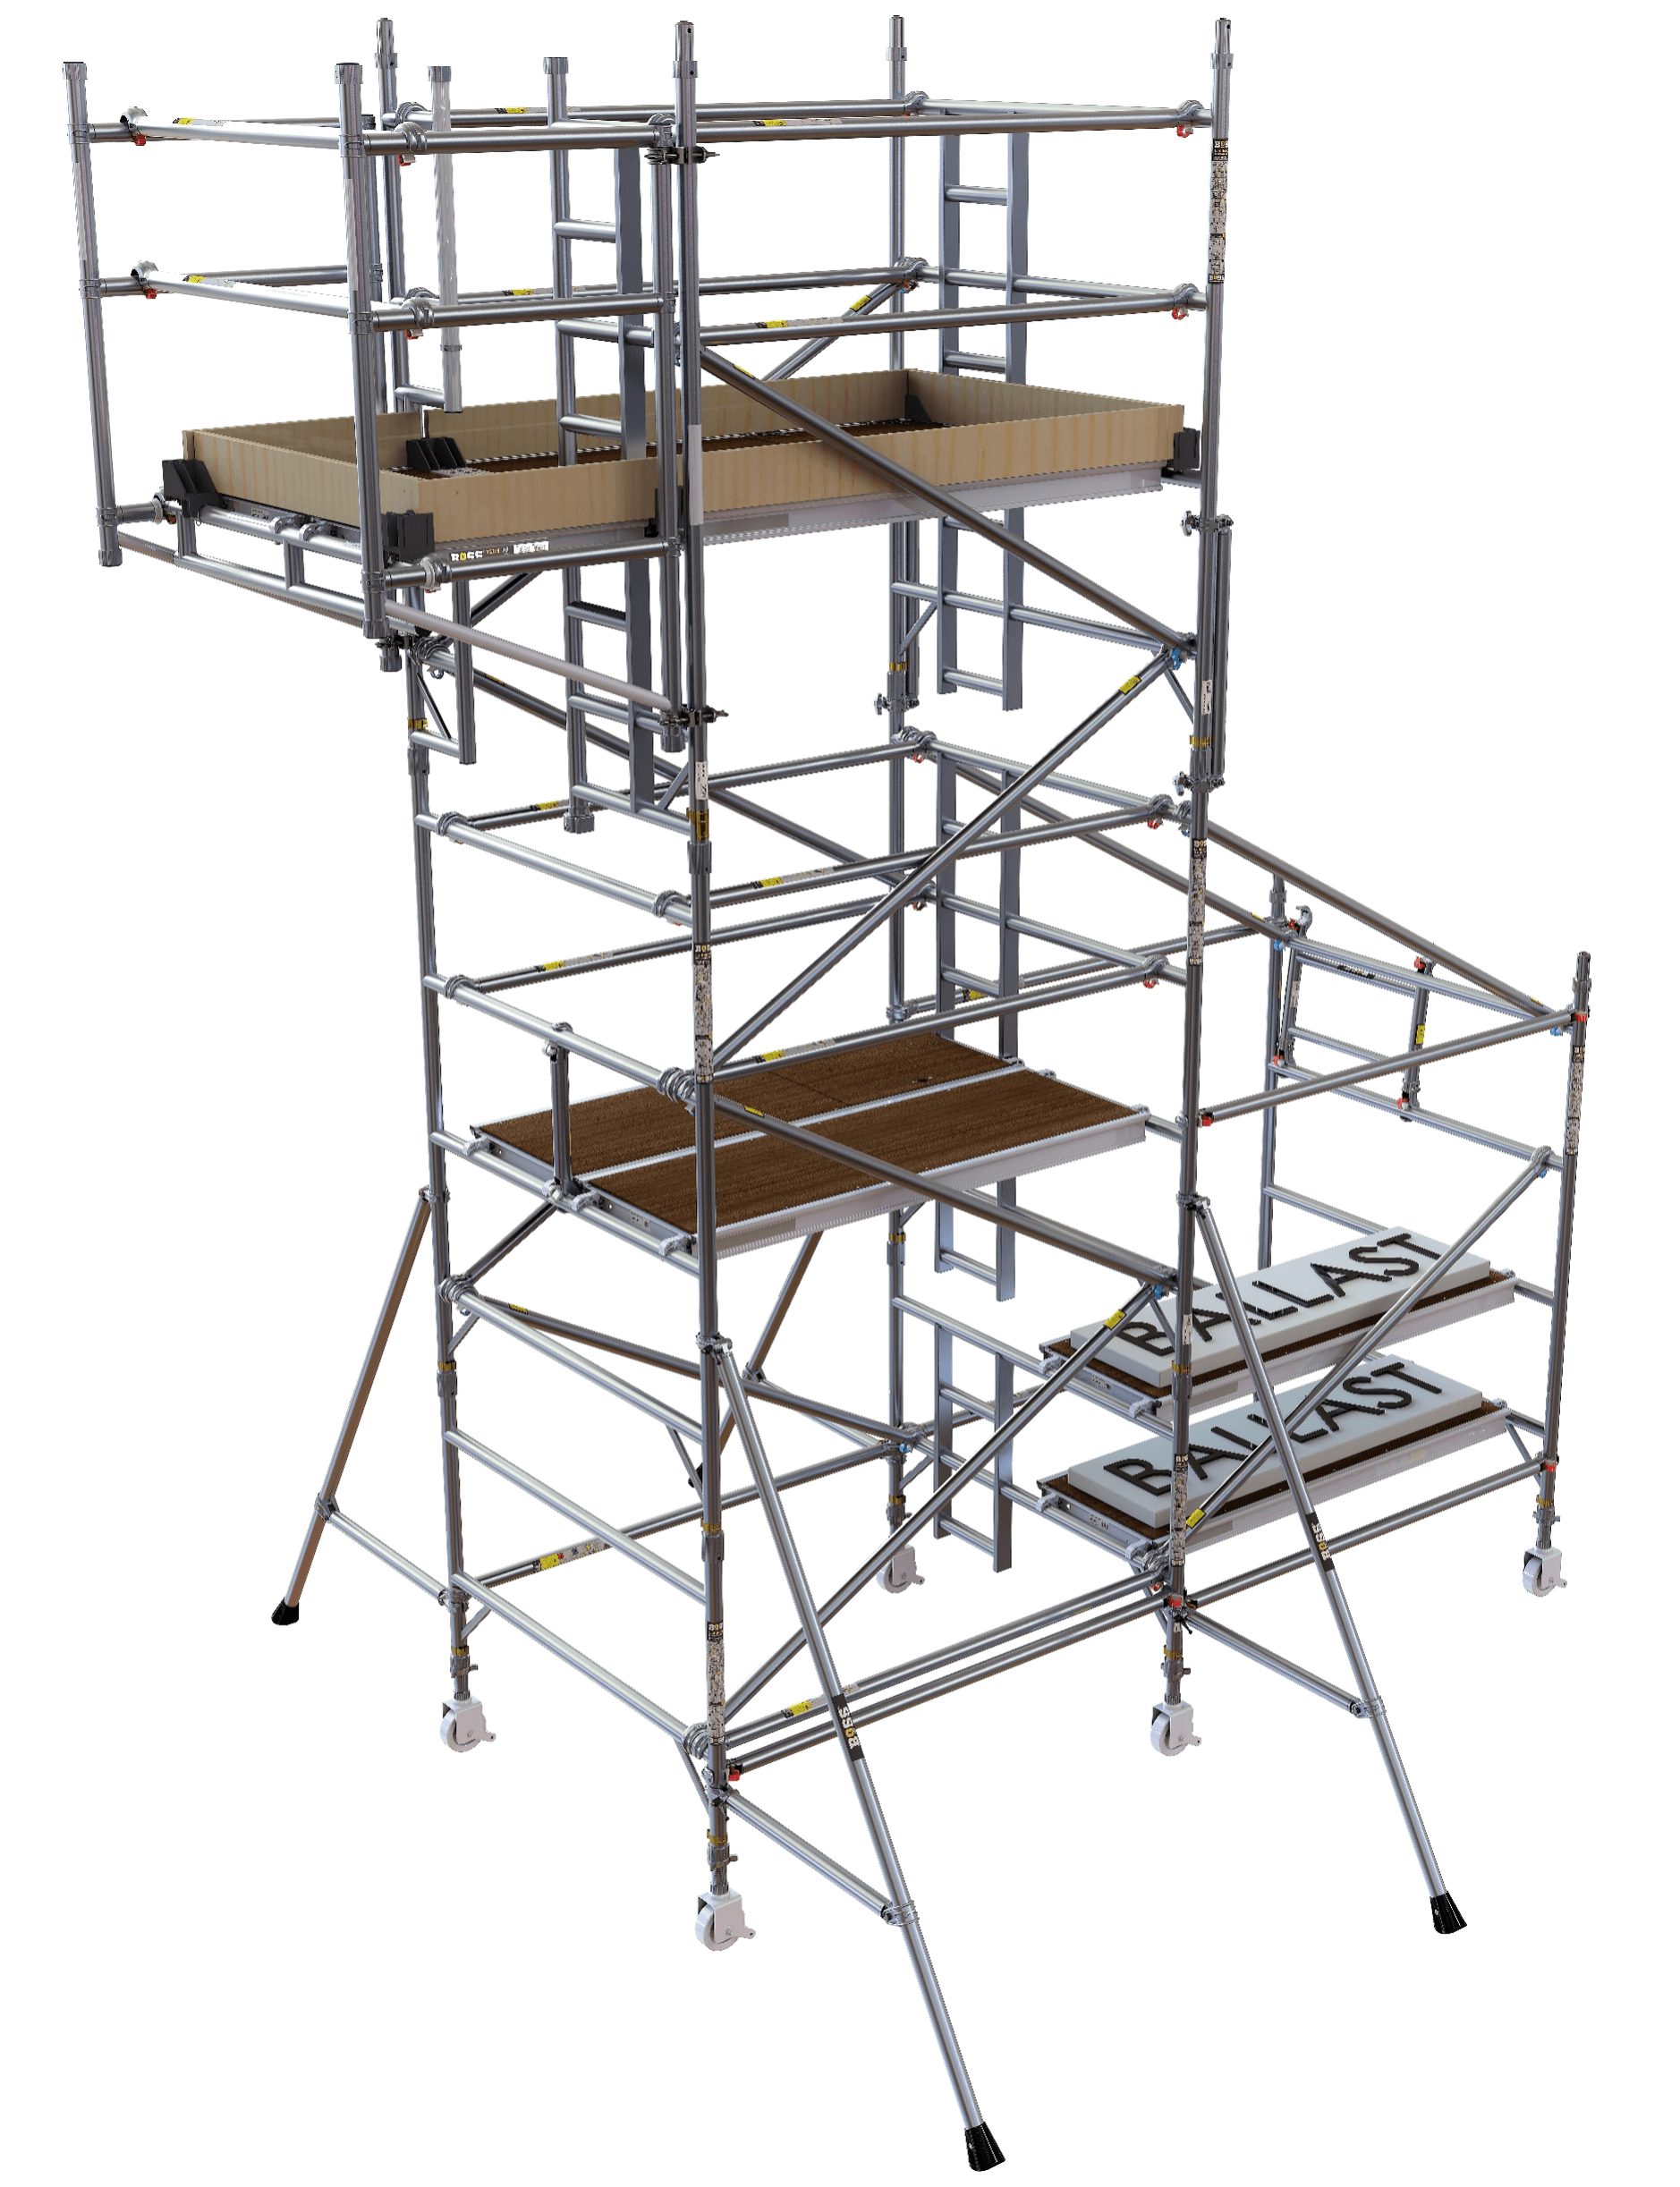 BoSS Compact End Cantilever Towers for obstacles - space constrains